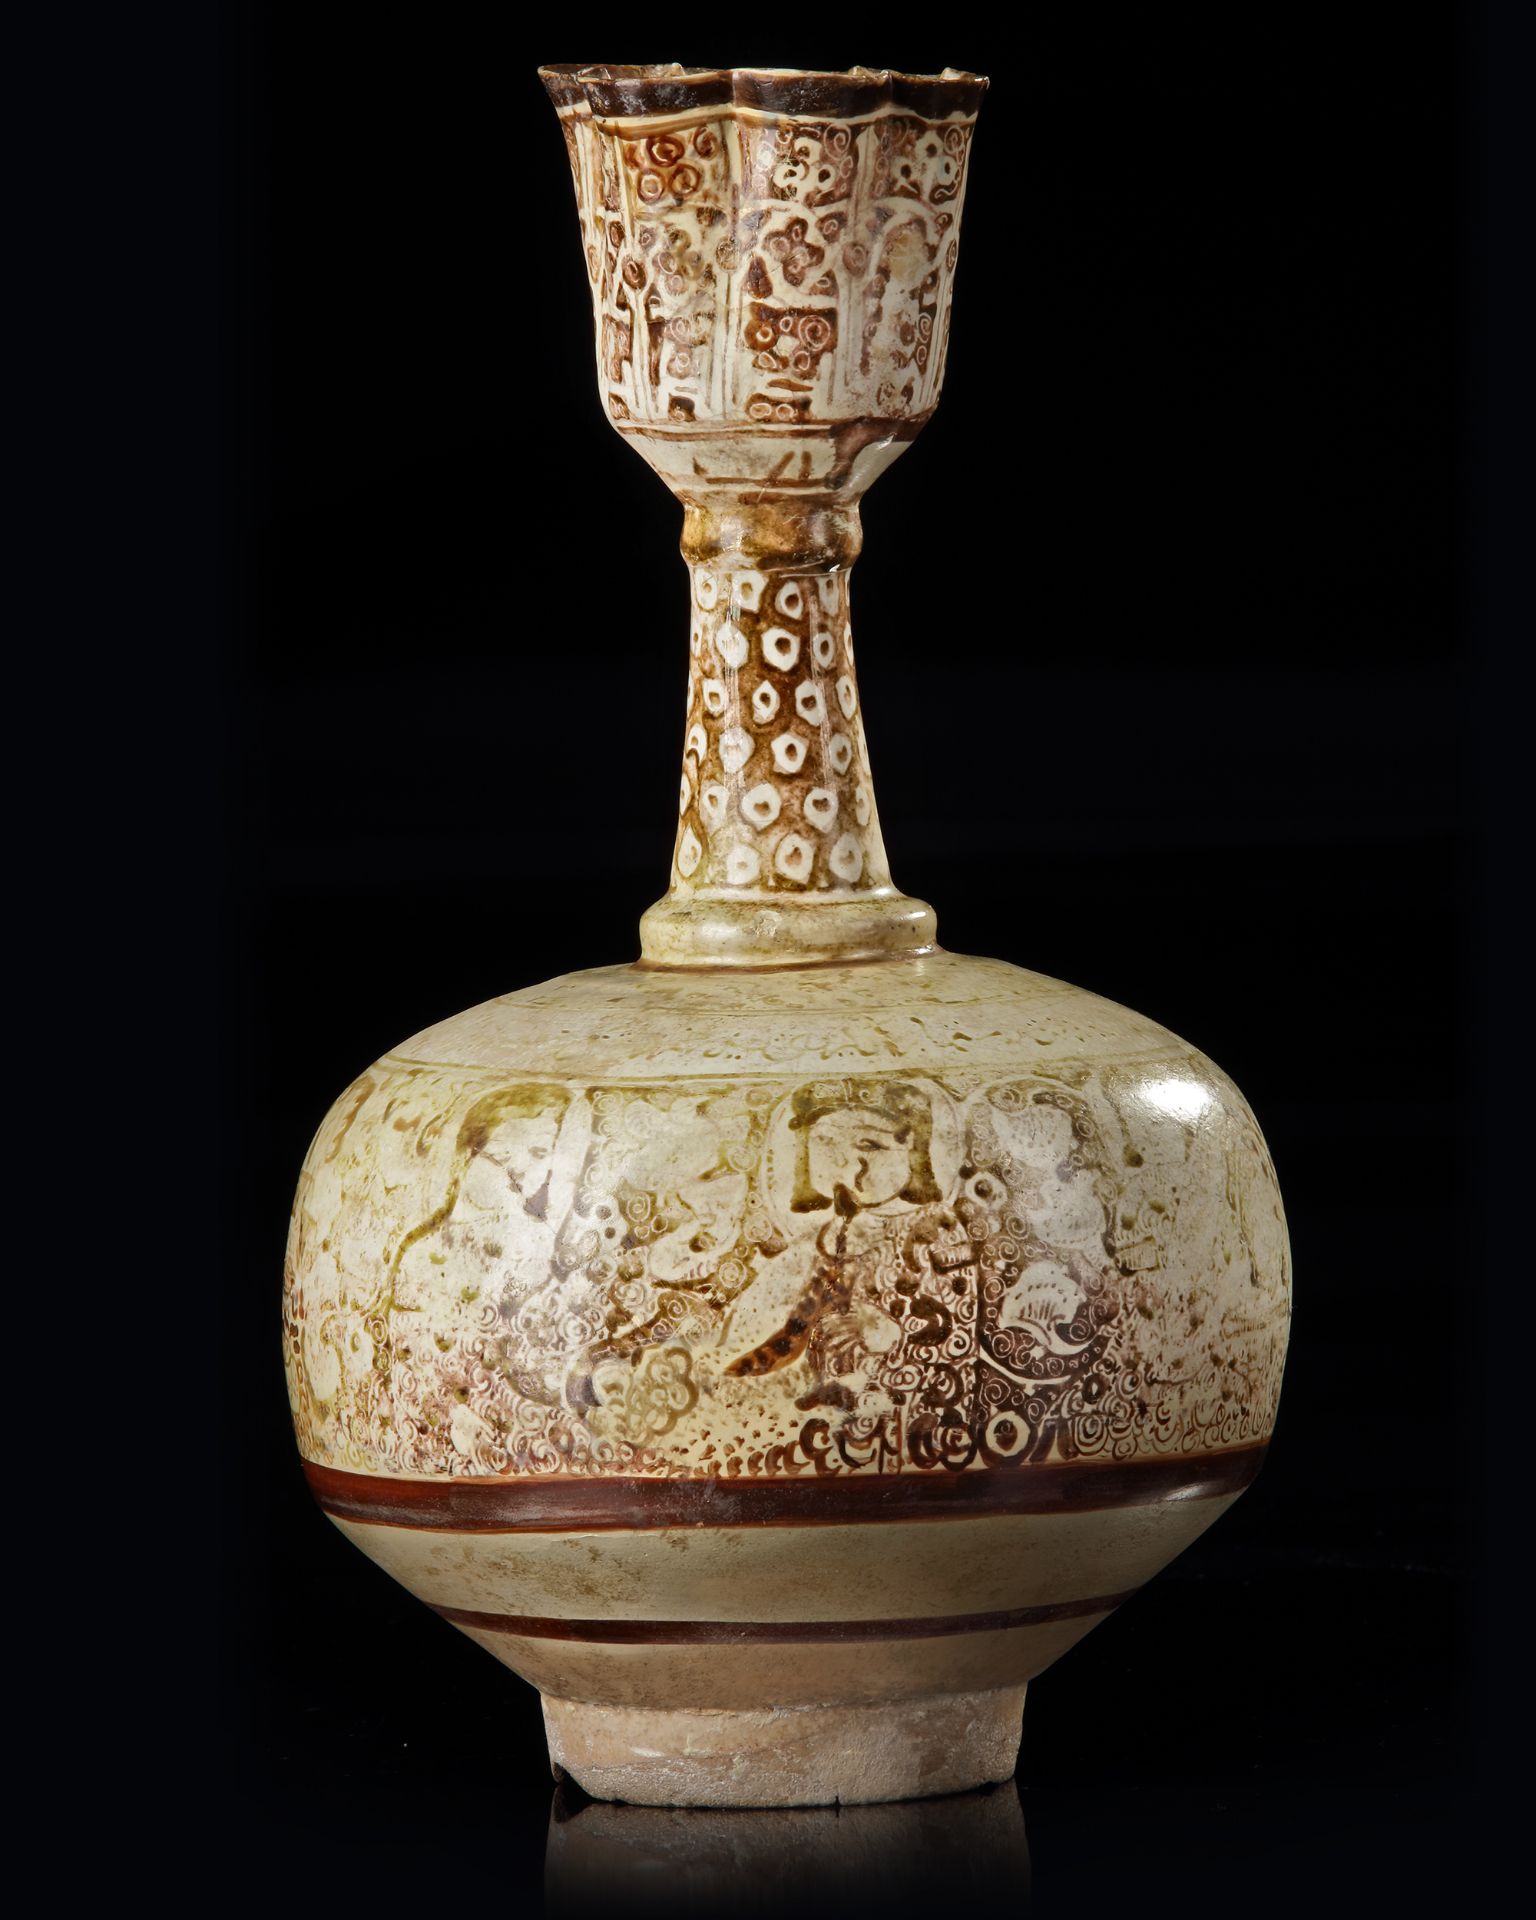 A KASHAN LUSTRE POTTERY BOTTLE VASE, PERSIA, EARLY 13TH CENTURY - Image 2 of 10